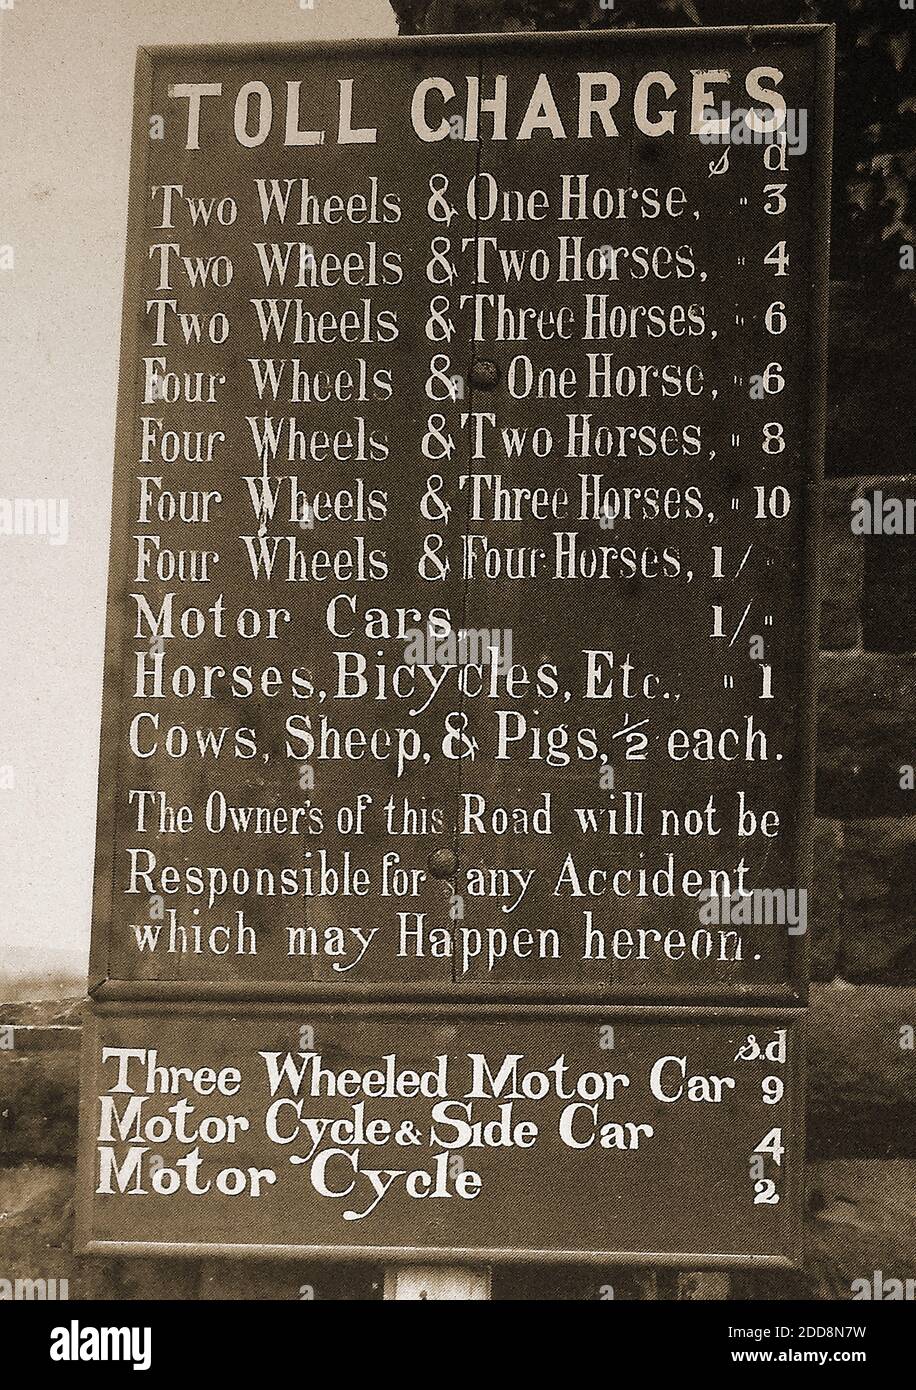 At the Toll bar on the then newly built road between Sandsend and Whitby, North Yorkshire. This photo shows the charges made for both horse-drawn and motor vehicles. Prices are shown in S & D (shillings and pence) and cover everything from three-wheeled cars, to carts, and farm animals. A photograph of the toll booth house is available on Alamy Stock Photo